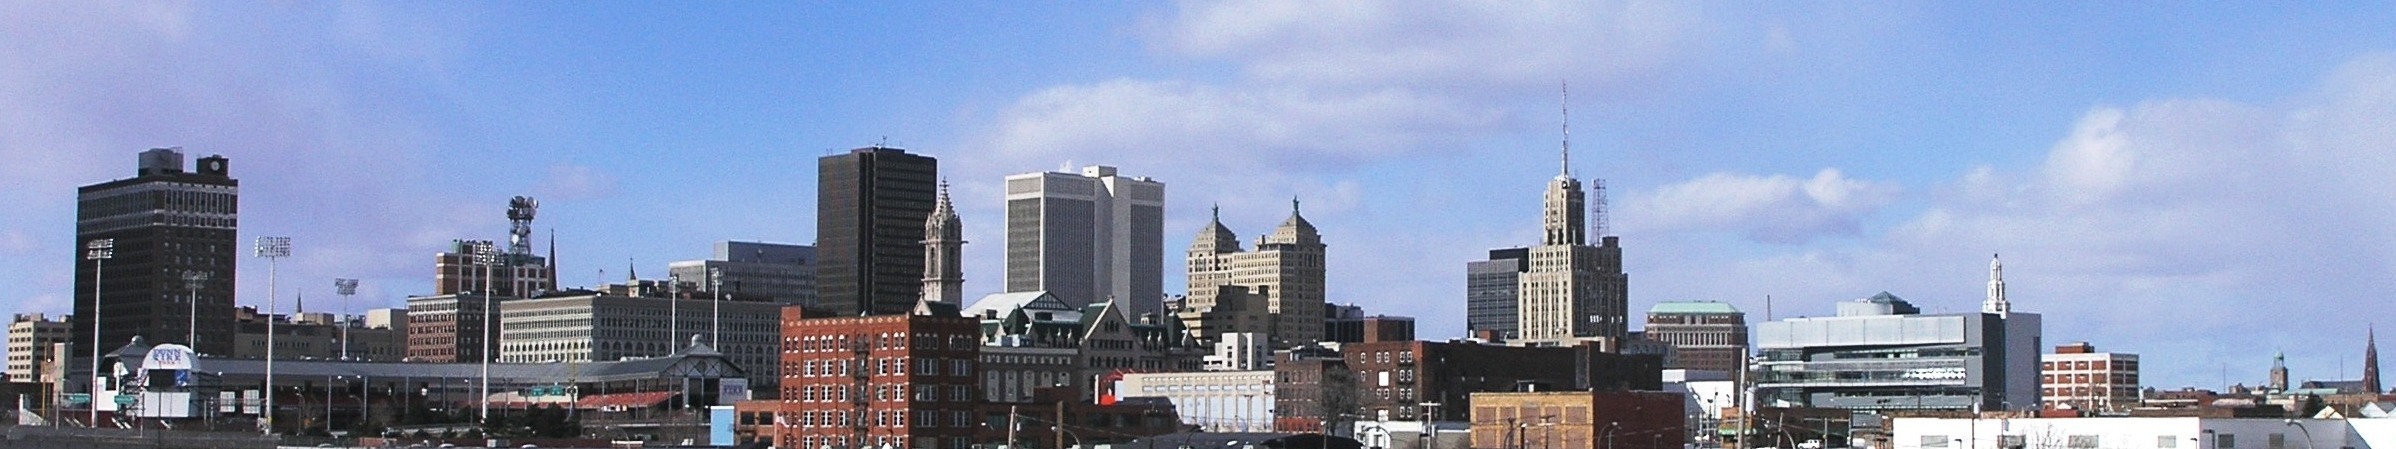 Buffalo, New York from I-190 North entering downtown